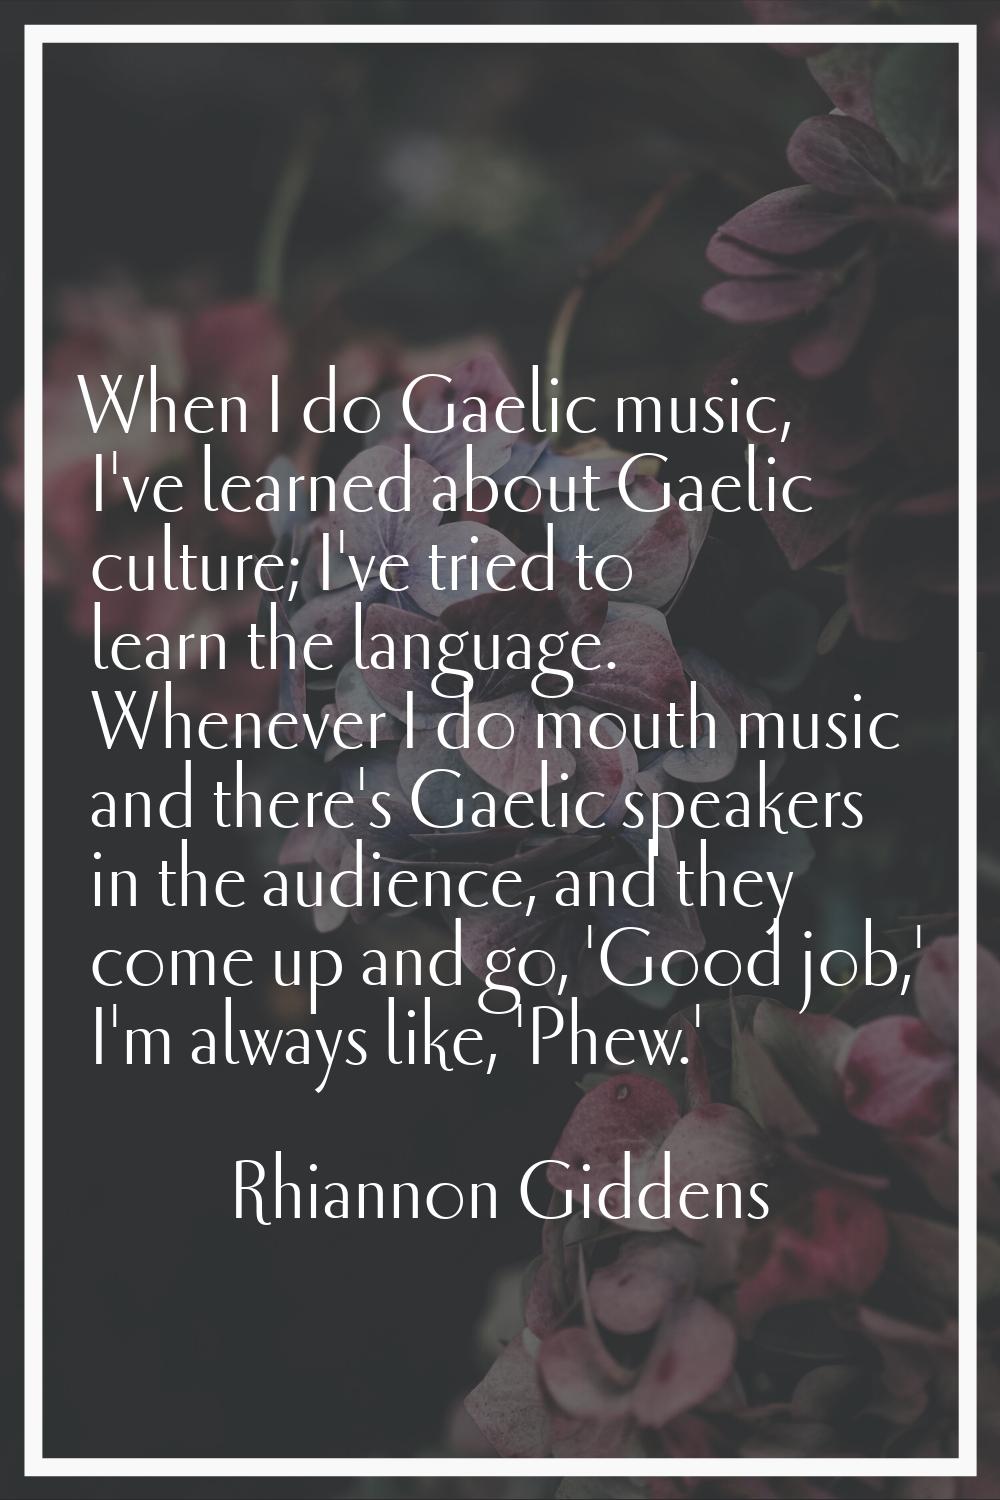 When I do Gaelic music, I've learned about Gaelic culture; I've tried to learn the language. Whenev